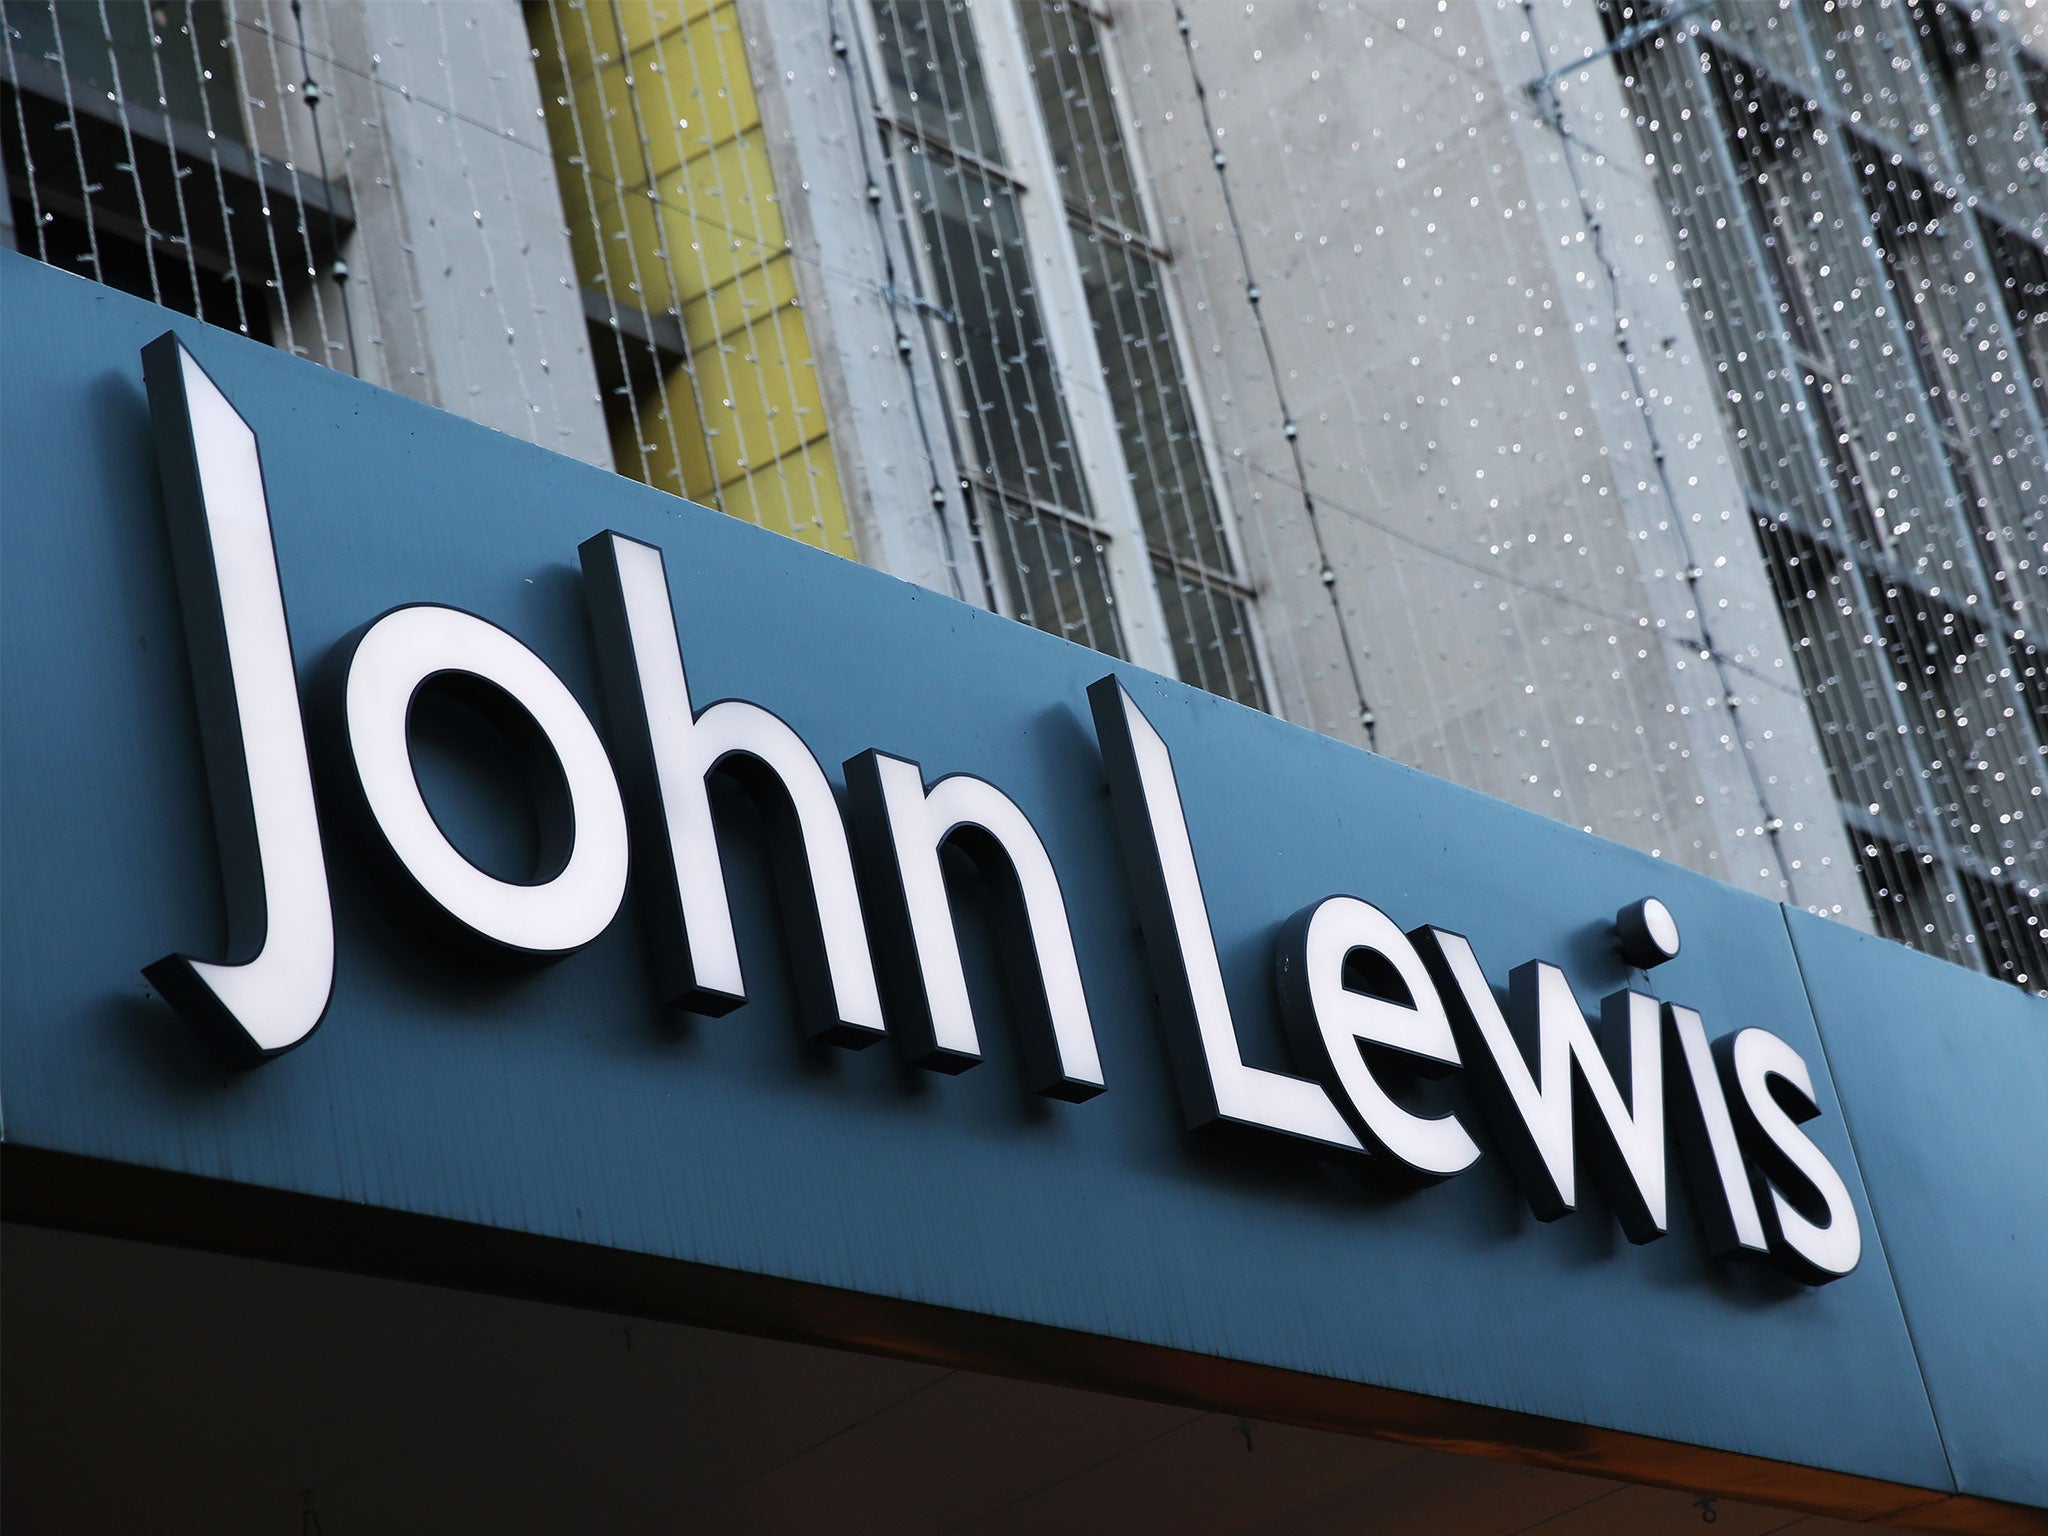 John Lewis is not branding the sales Cyber Monday deals, but is nonetheless offering discounts